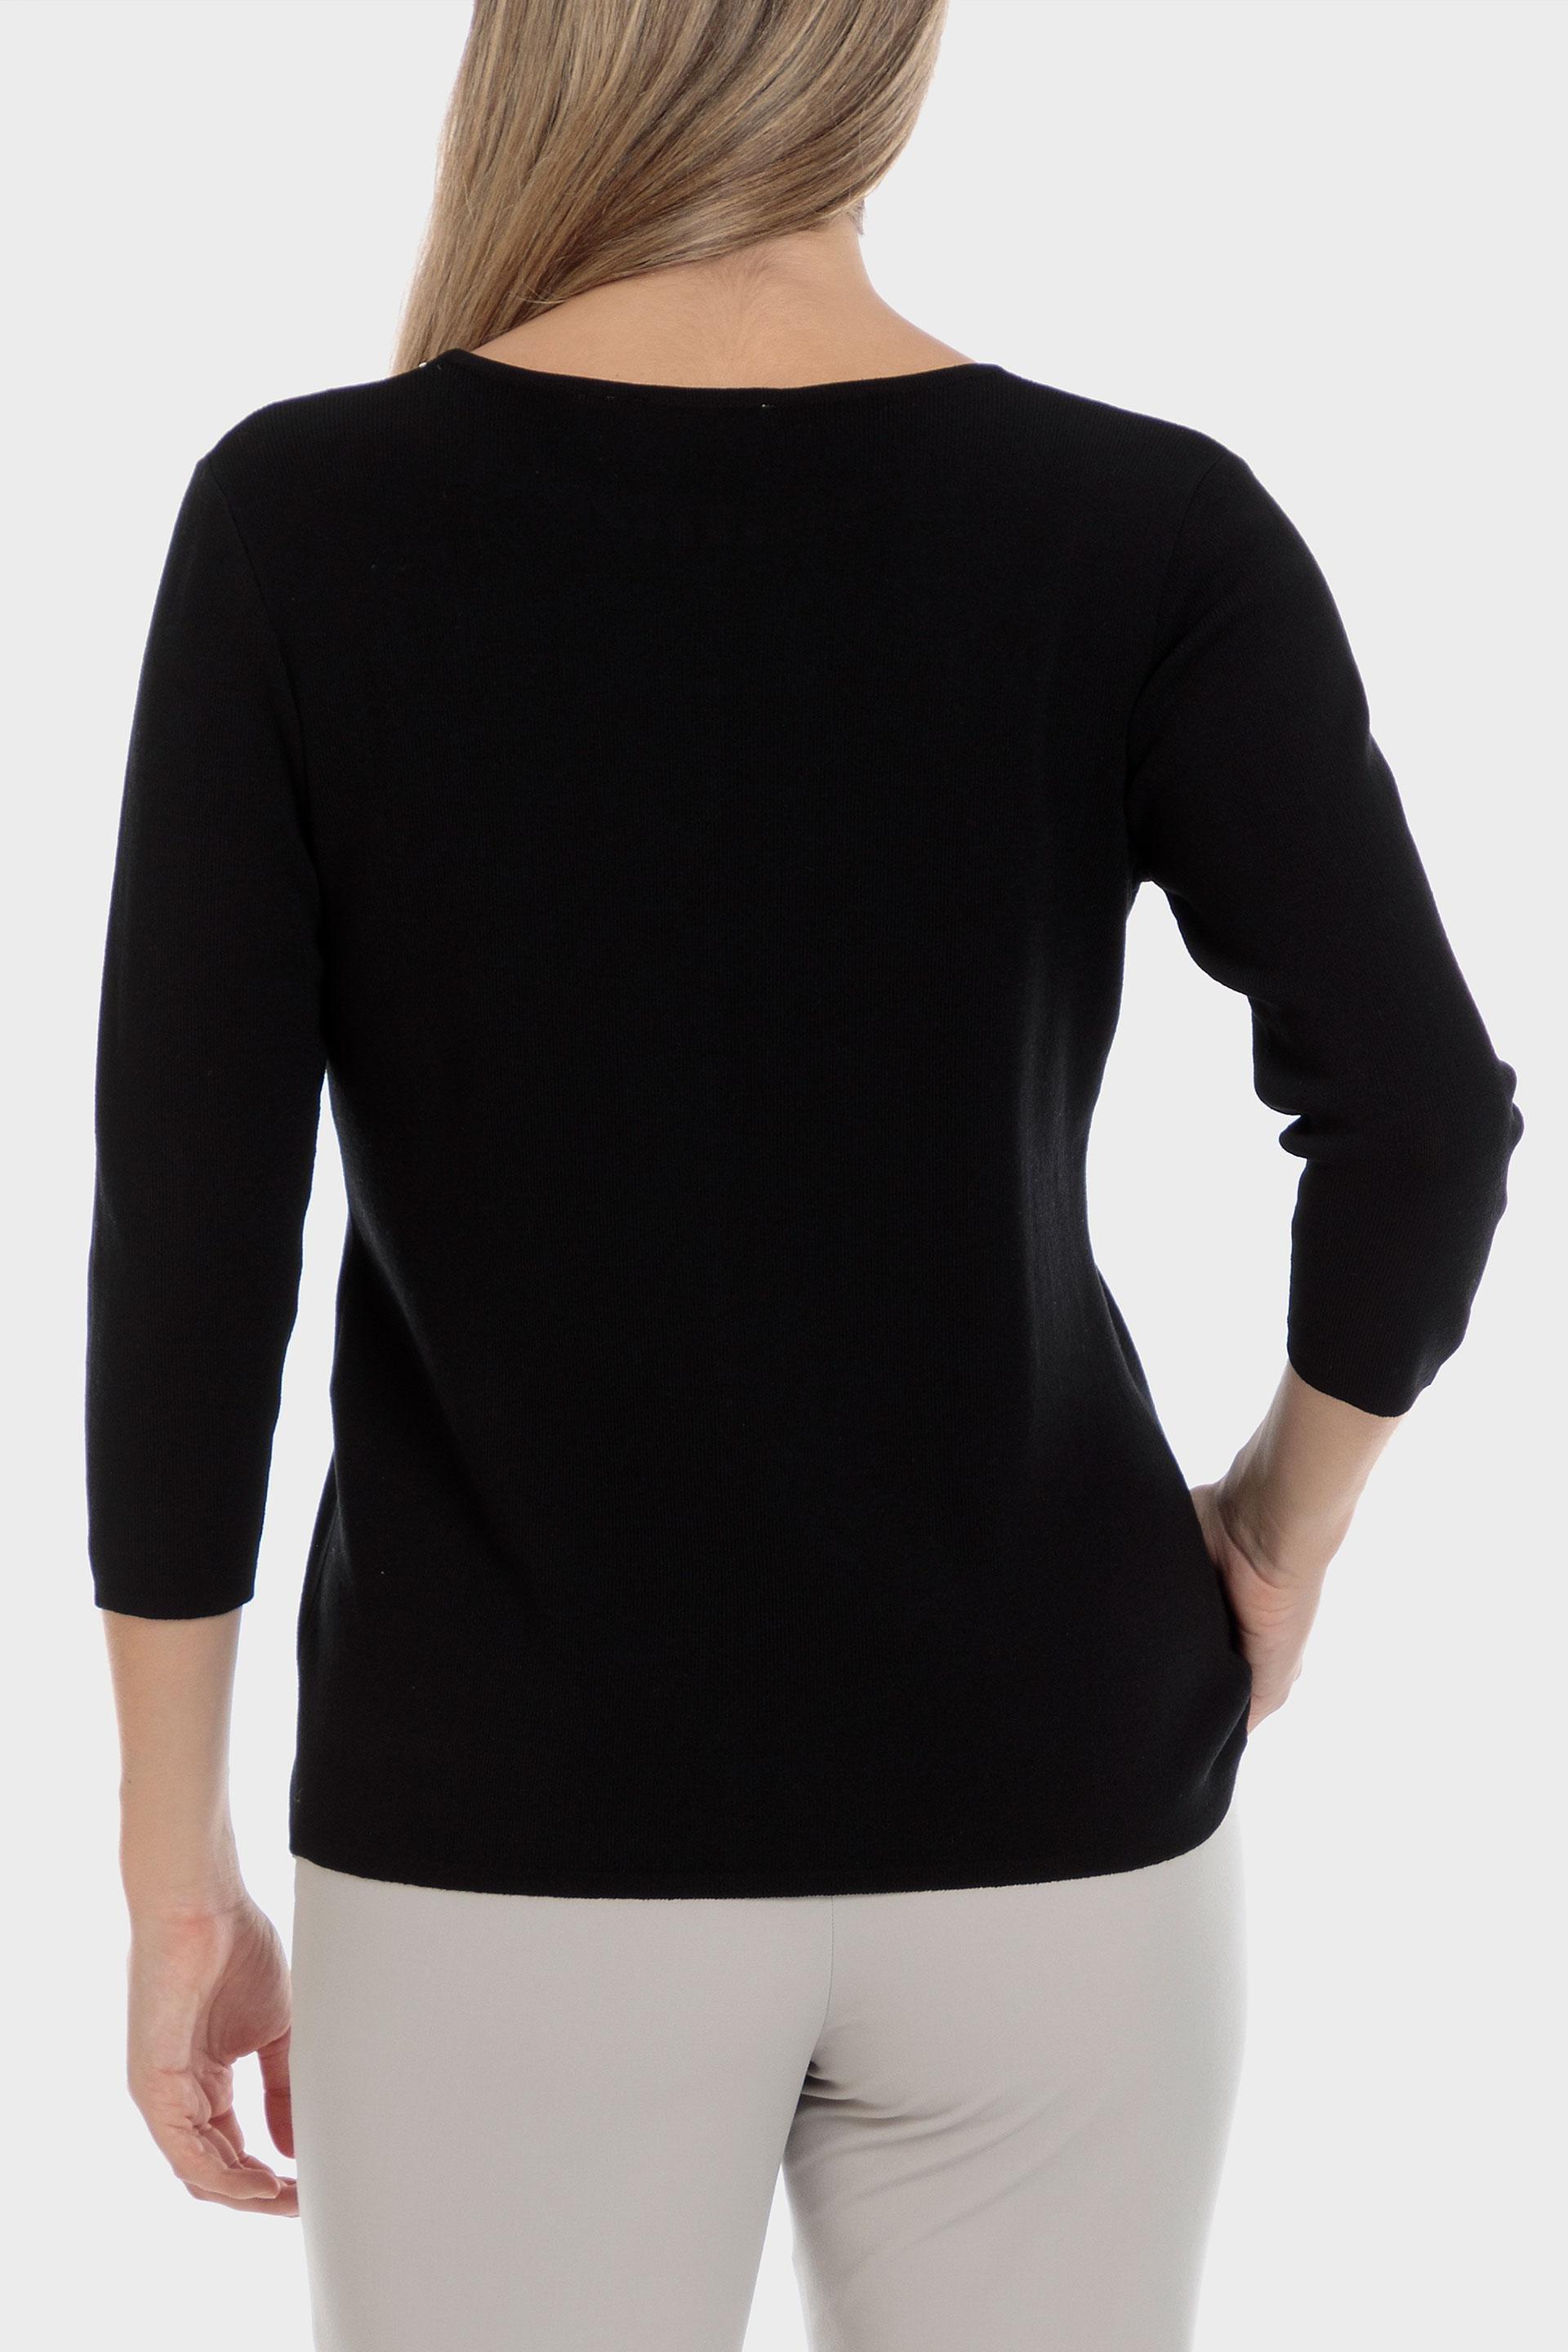 Punt Roma - White Studded Sweater